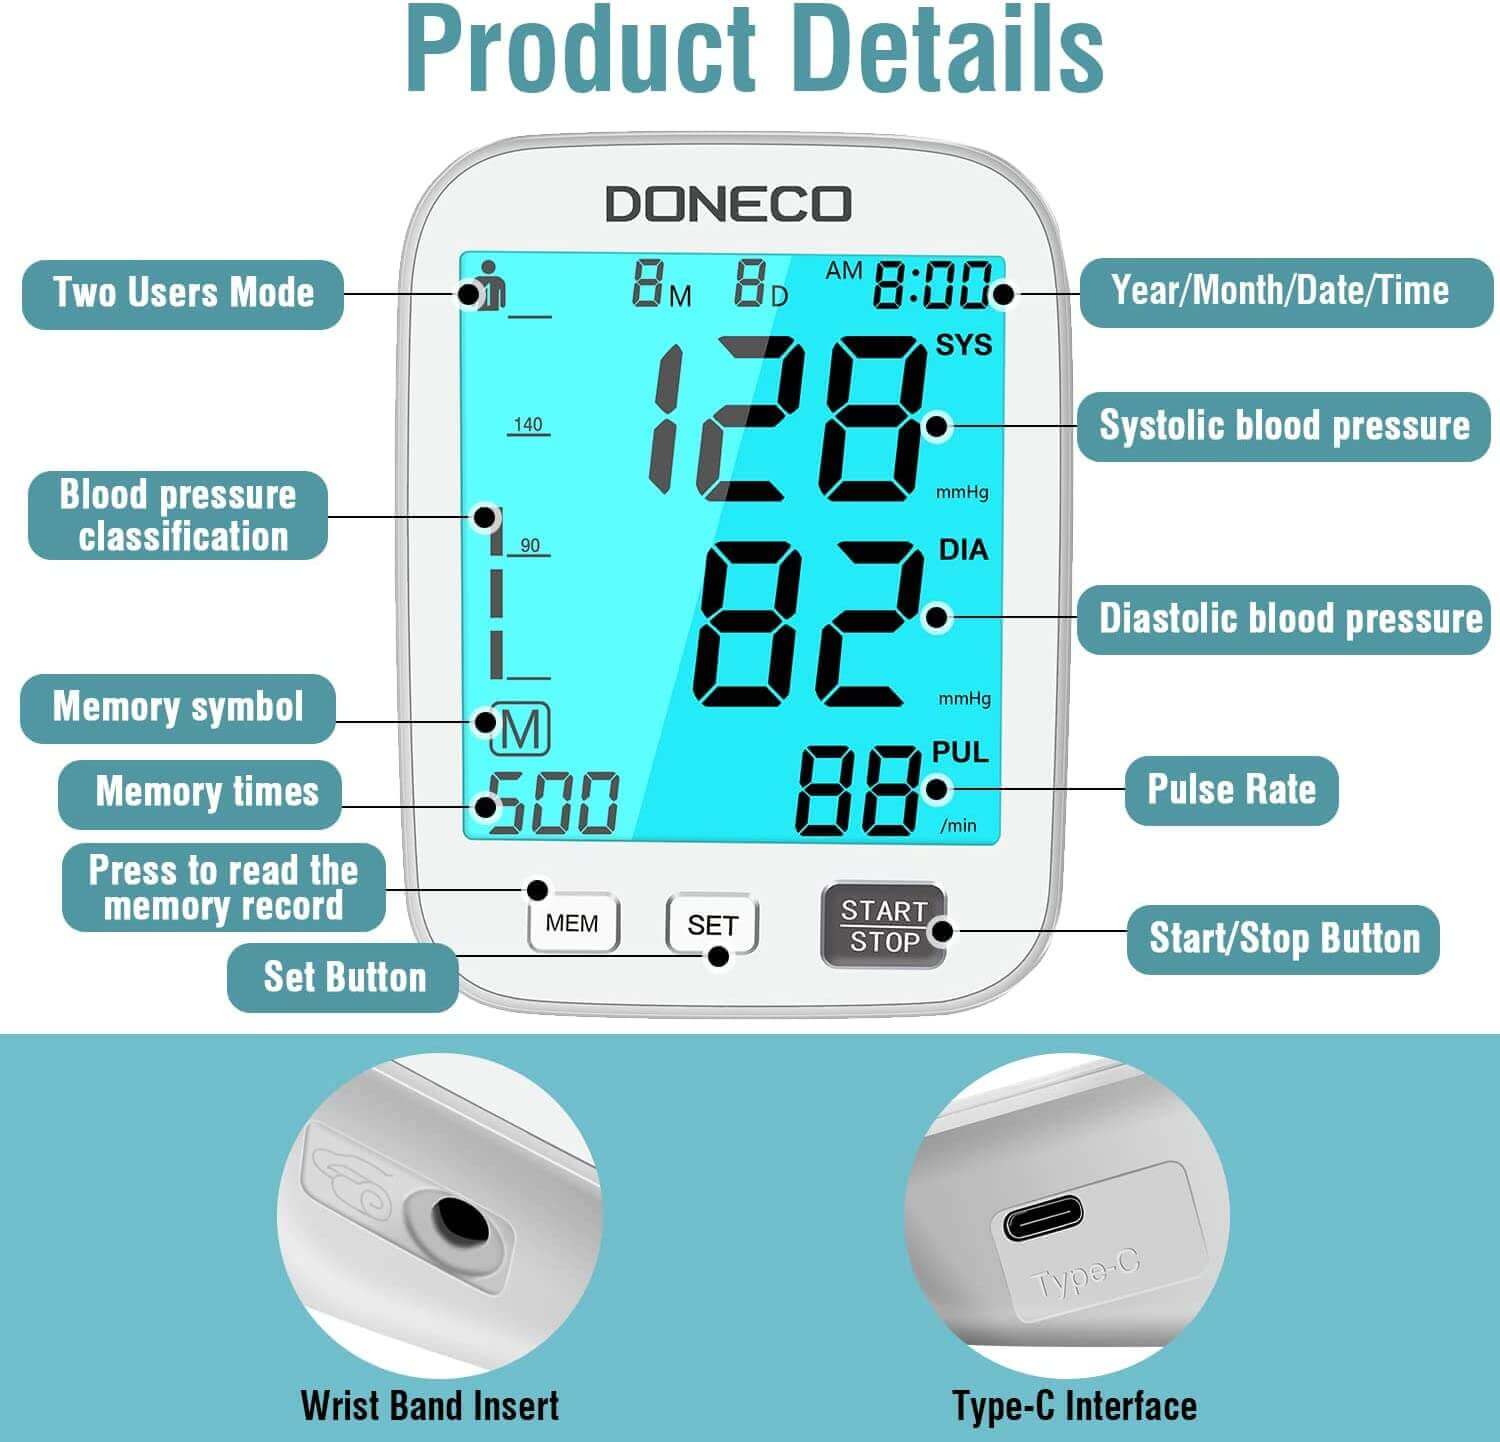 DONECO Blood Pressure Monitor Upper Arm Automatic Digital BP Monitor Adjustable Large Cuff Backlit Display 2x500 Memory Includes Batteries Monitoring Meter for Home Use - Product Details